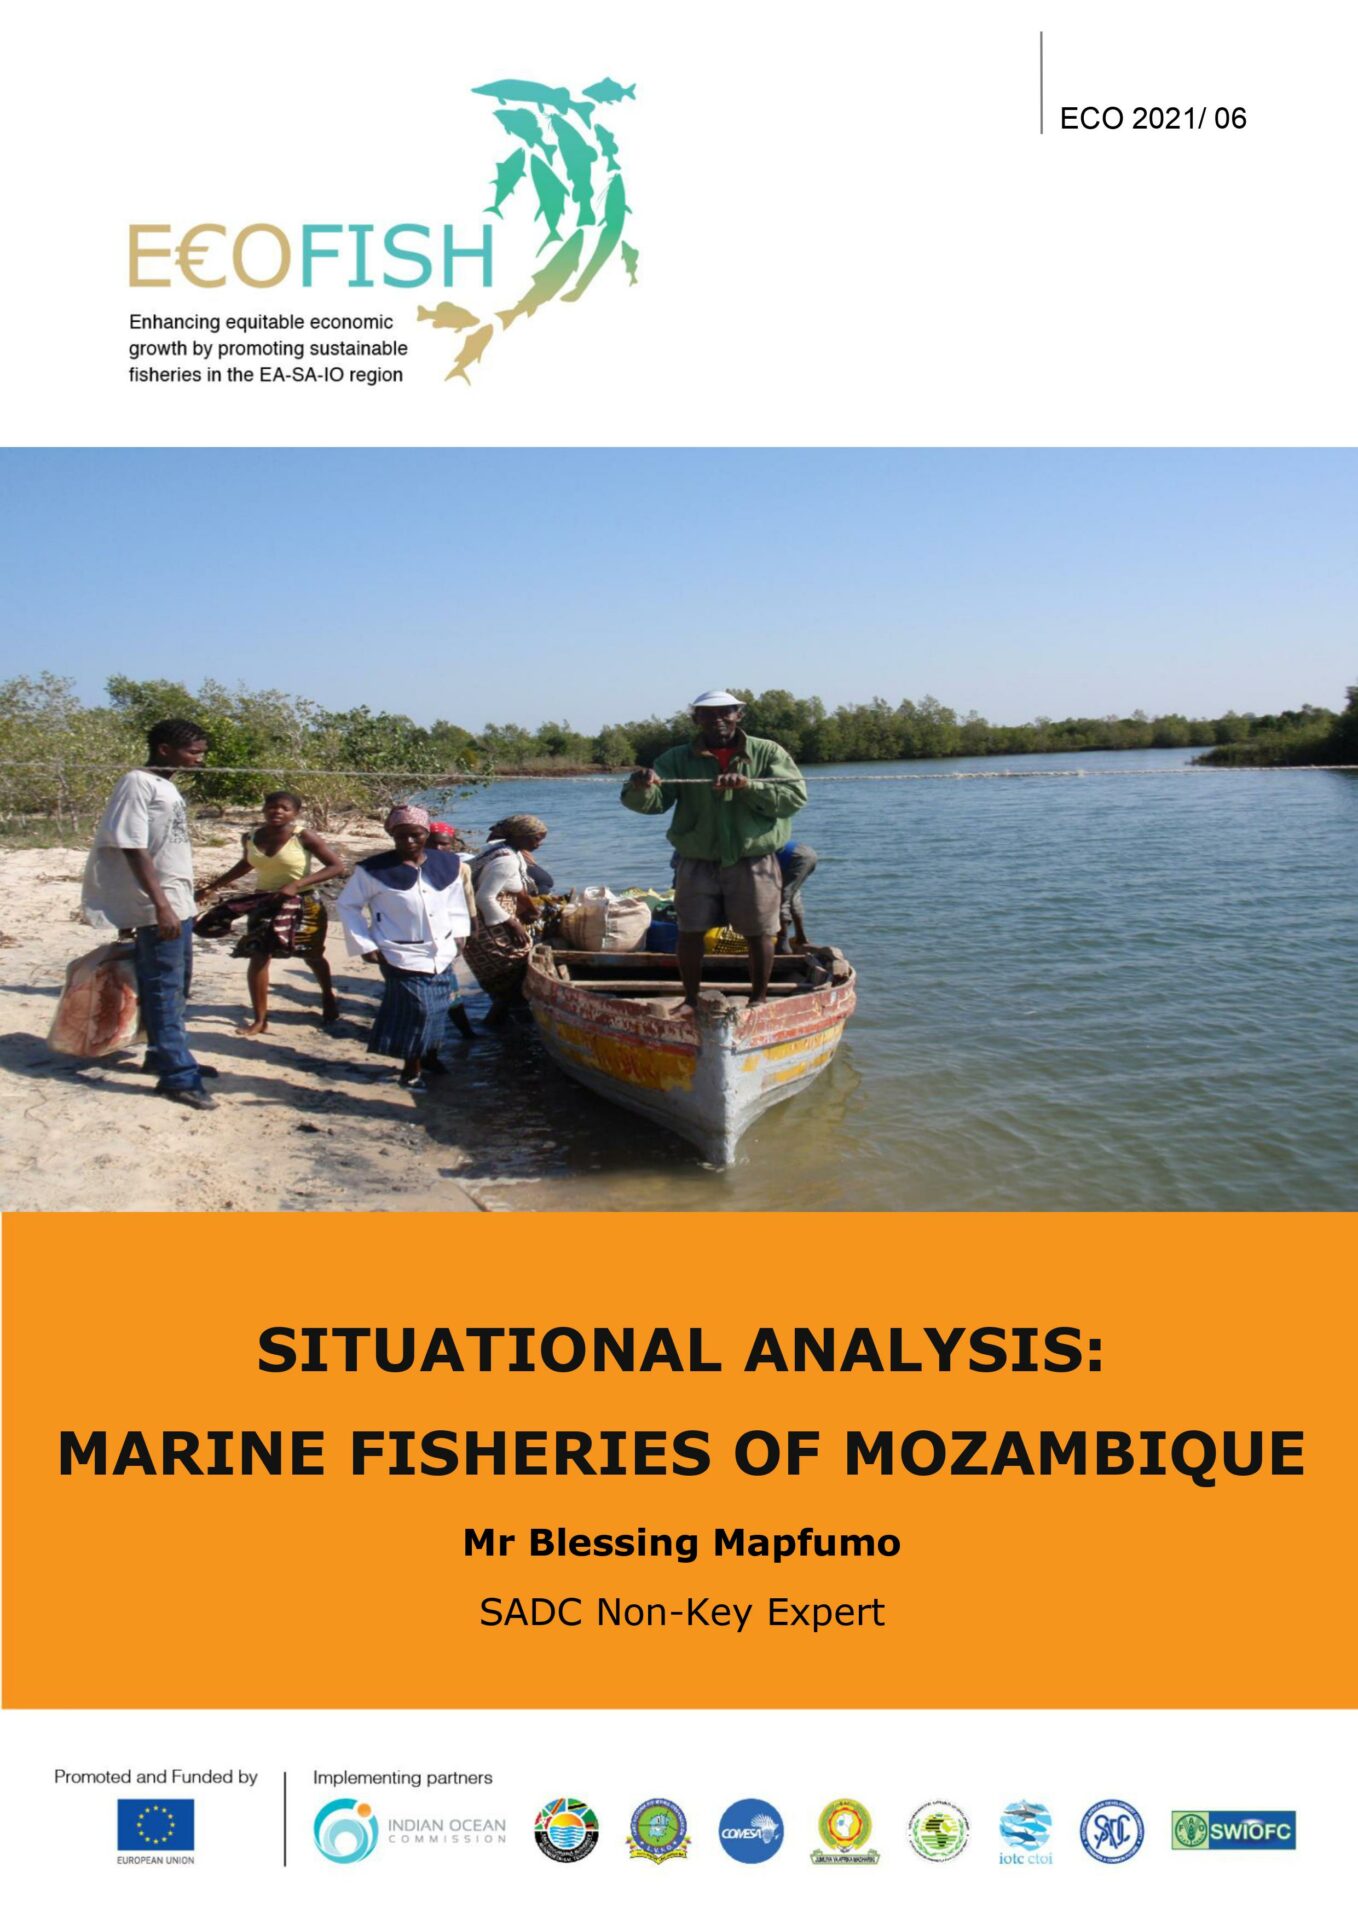 MARINE FISHERIES OF MOZAMBIQUE